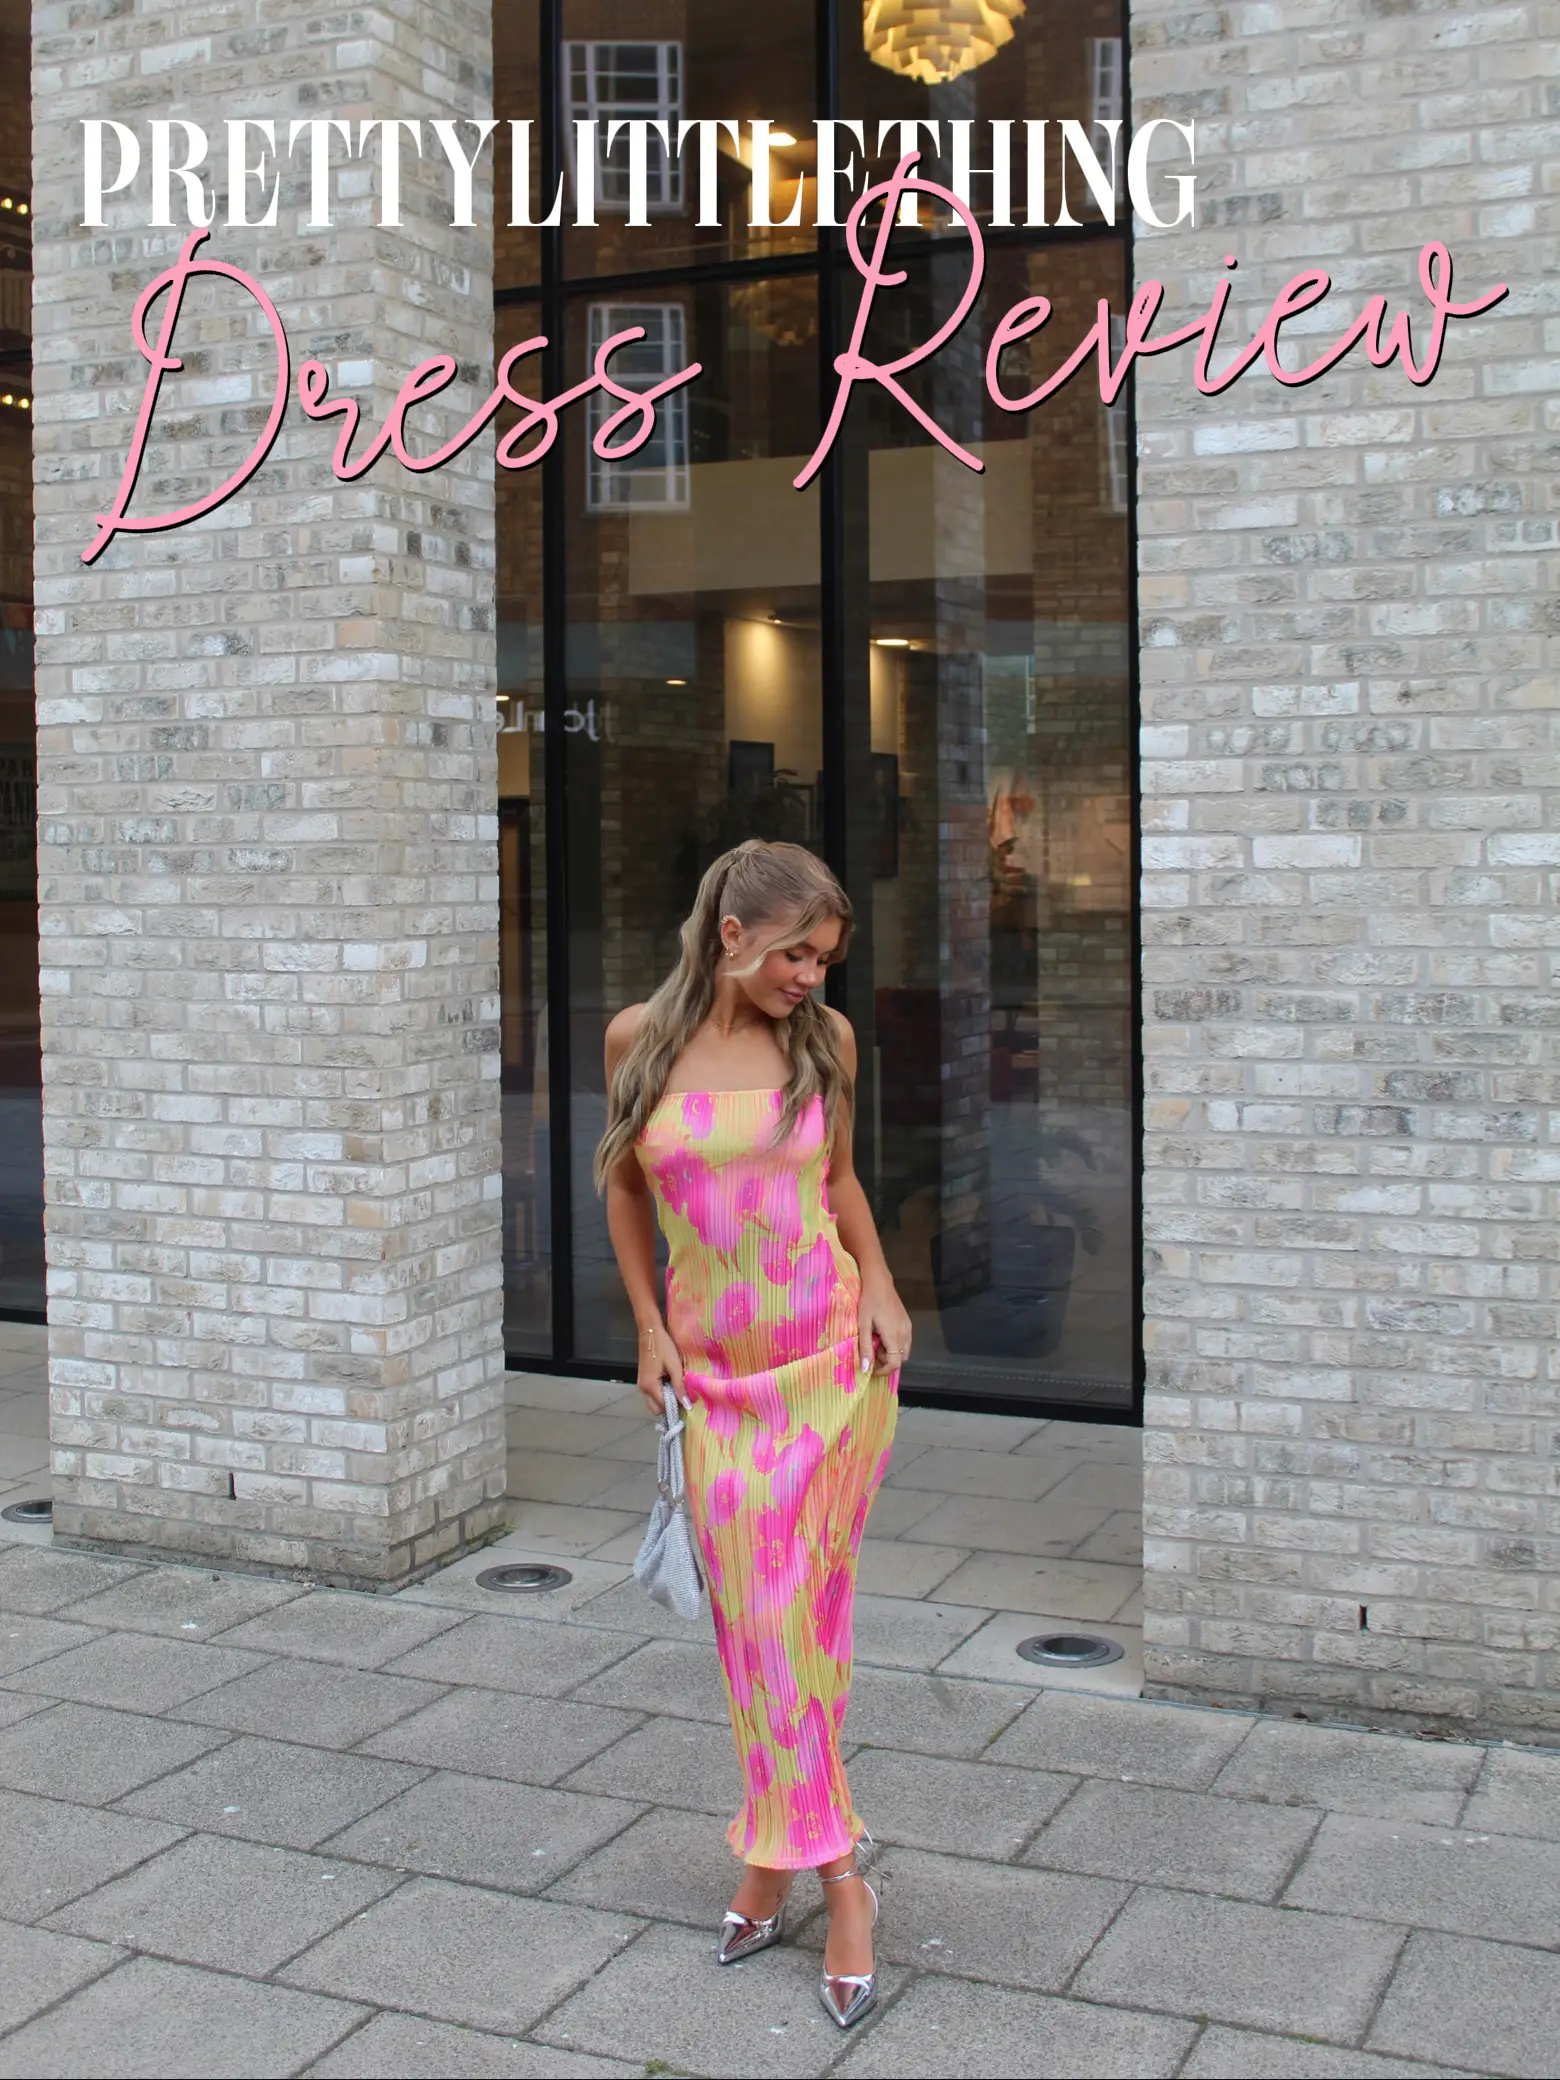 REVIEWING REBELLIOUS FASHION OVERSIZED DRESS, Gallery posted by Kemmystry